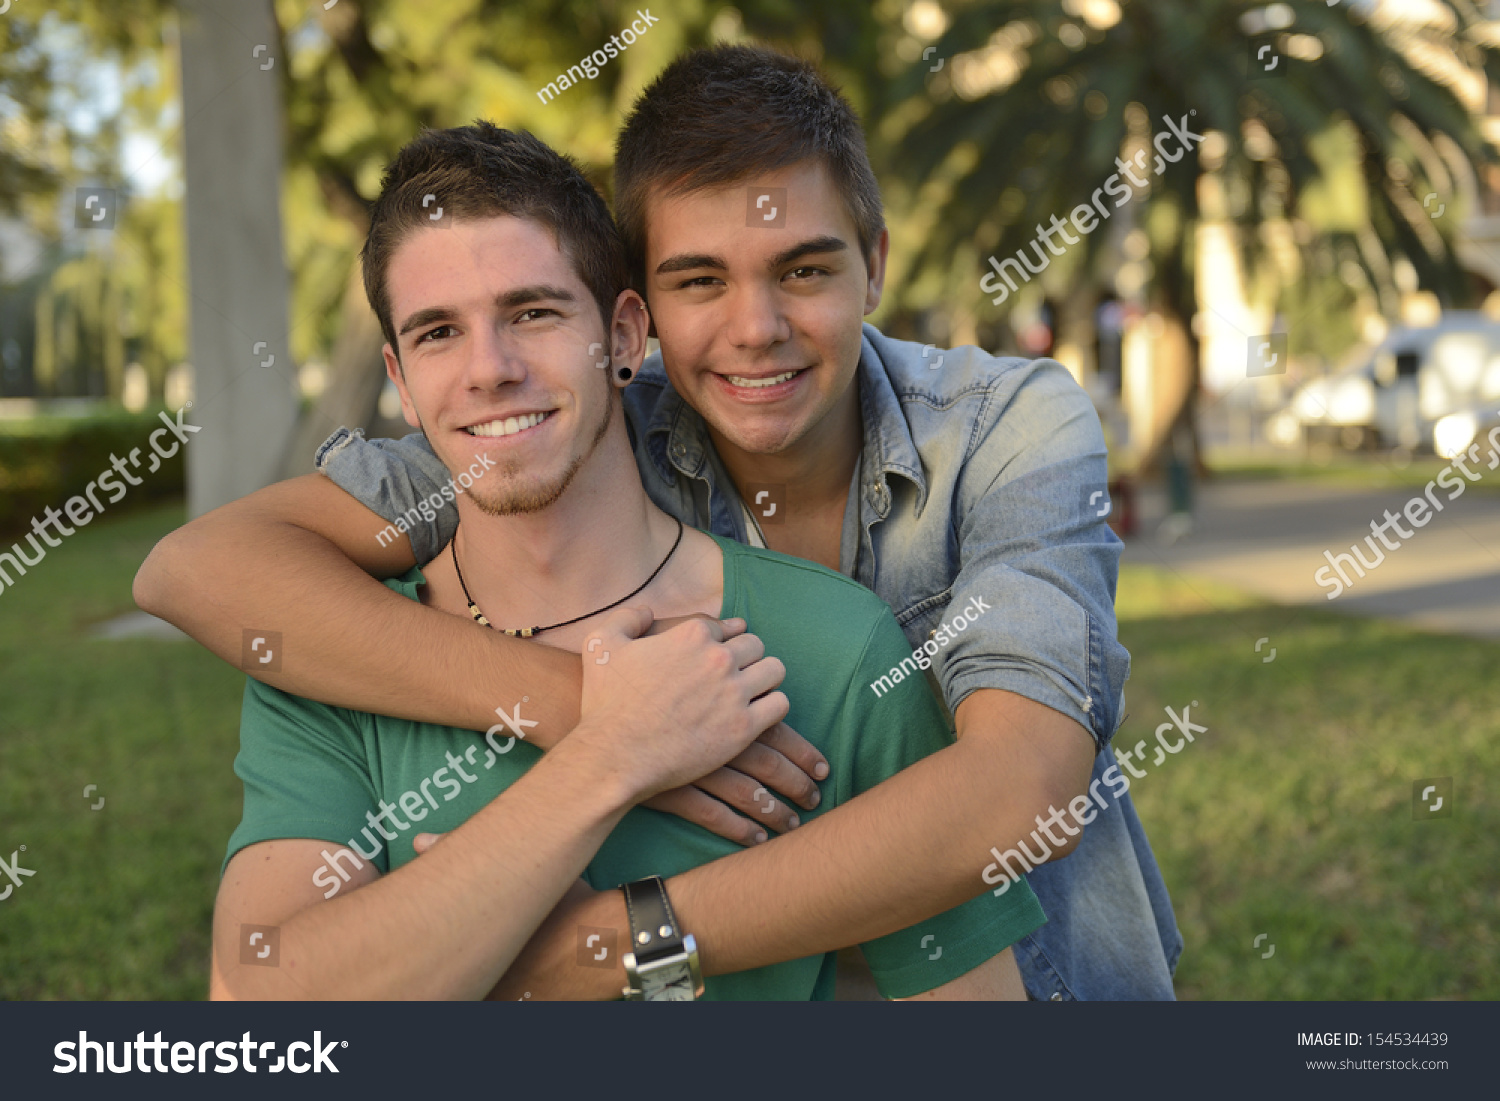 Portrait of a happy gay couple outdoors #154534439